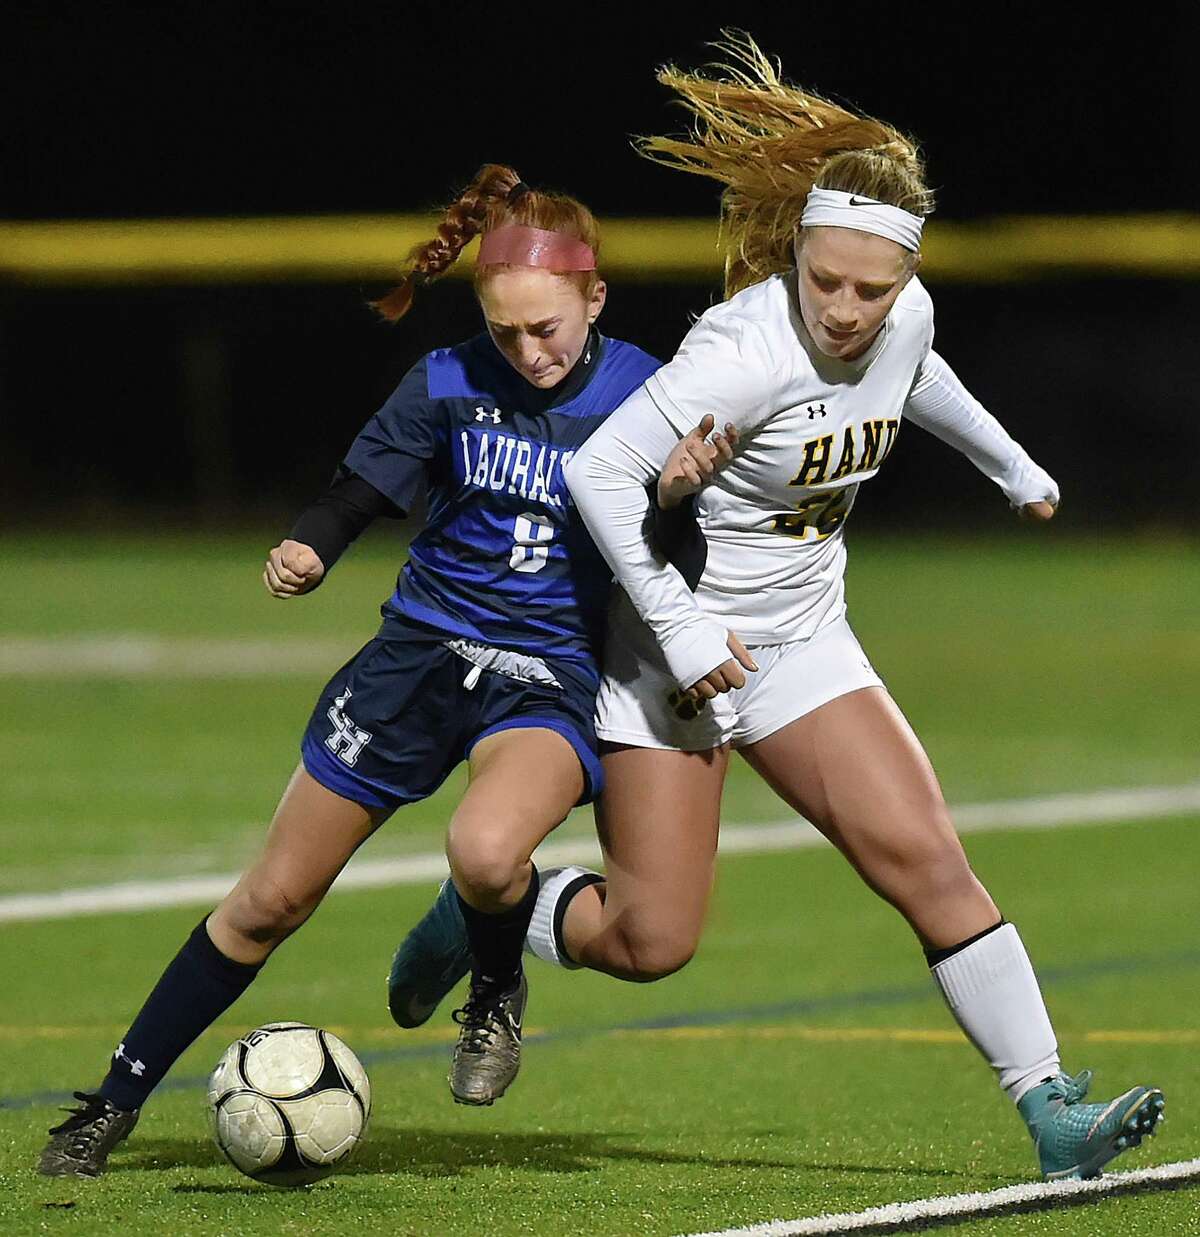 Hand senior captain Gabby Egidio controls the ball as Lauralton Hall junior Emma Koerner defends in the second round of the Class L state soccer tournament, Thursday, Nov. 9, 2017, at Strong Field at the Surf Club in Madison. Hand won, 3-0.